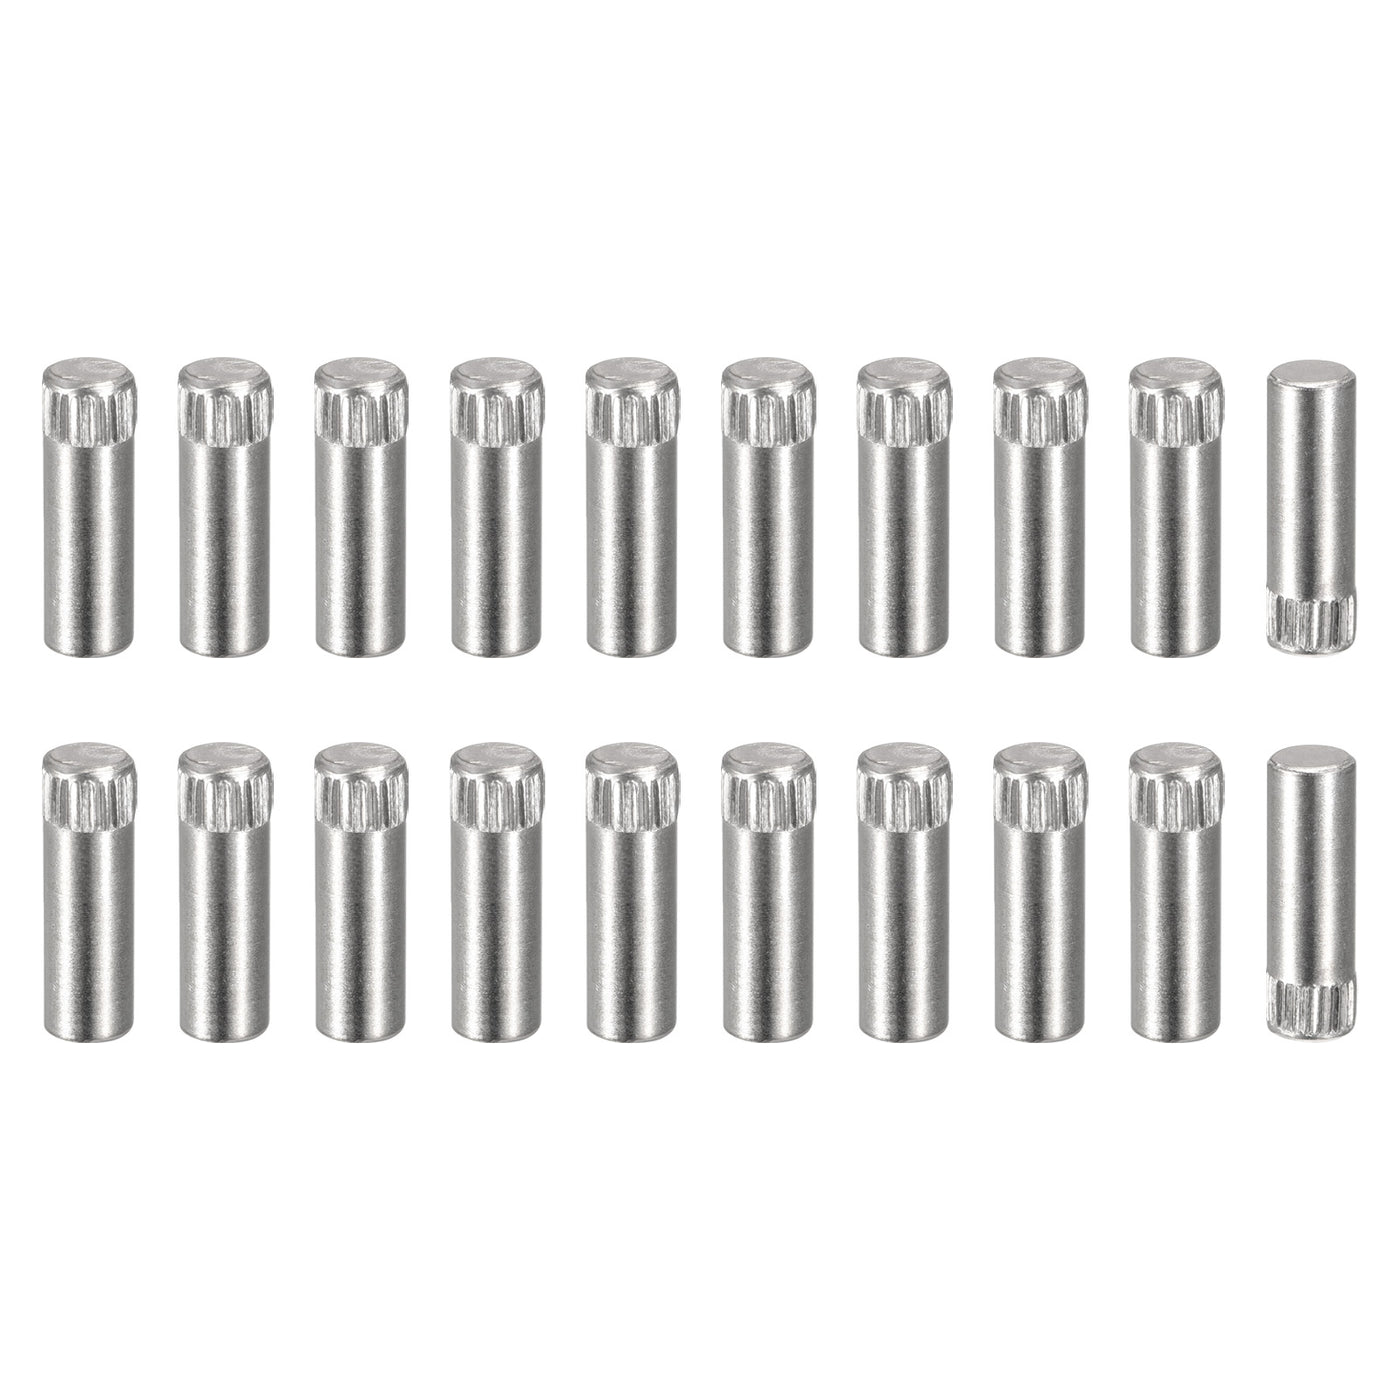 uxcell Uxcell 6x20mm 304 Stainless Steel Dowel Pins, 20Pcs Knurled Head Flat End Dowel Pin